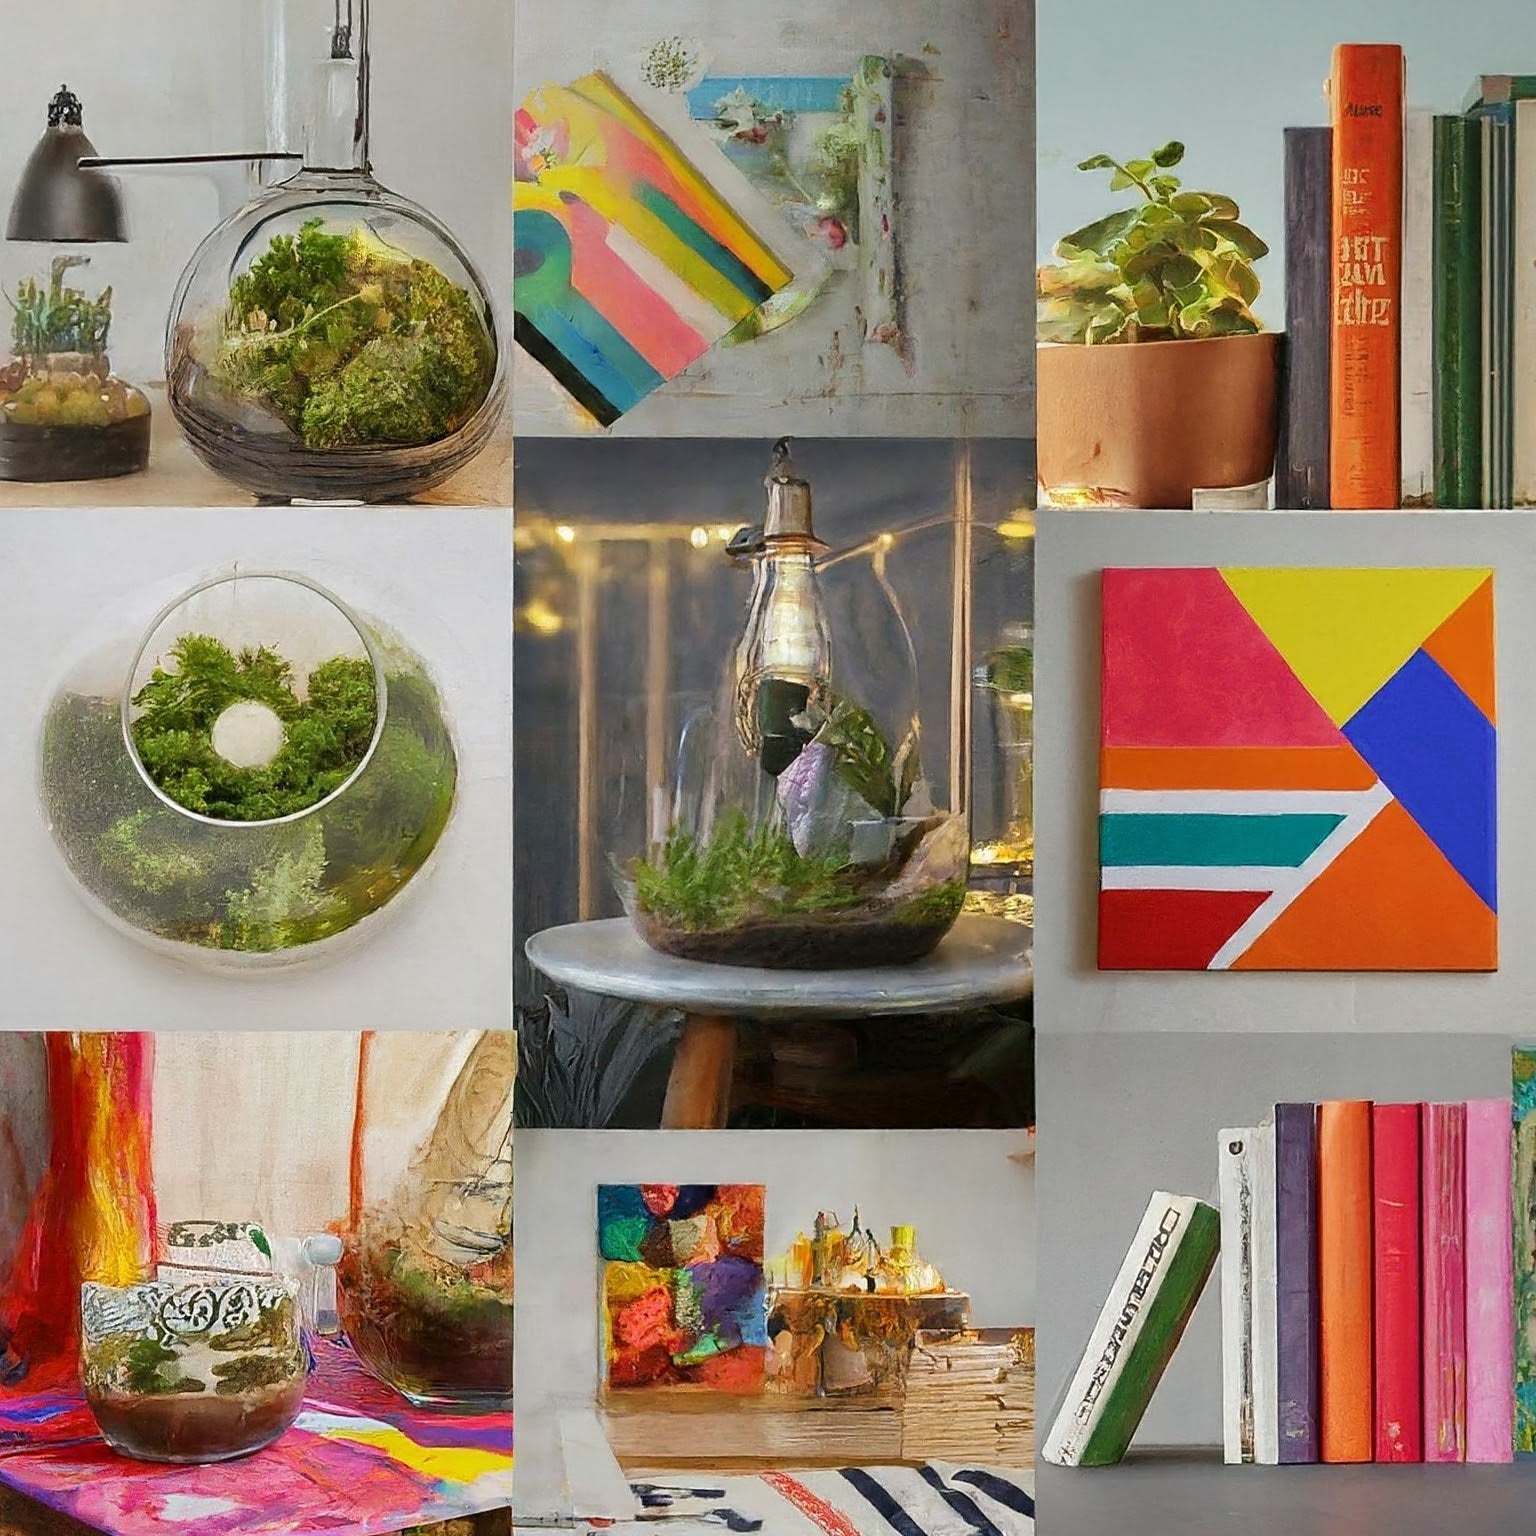 Collage showcasing DIY home decor projects: a terrarium with succulents, a painted abstract canvas, a pendant lamp with fairy lights, a geometrically patterned rug, and bookends with decorative knobs.